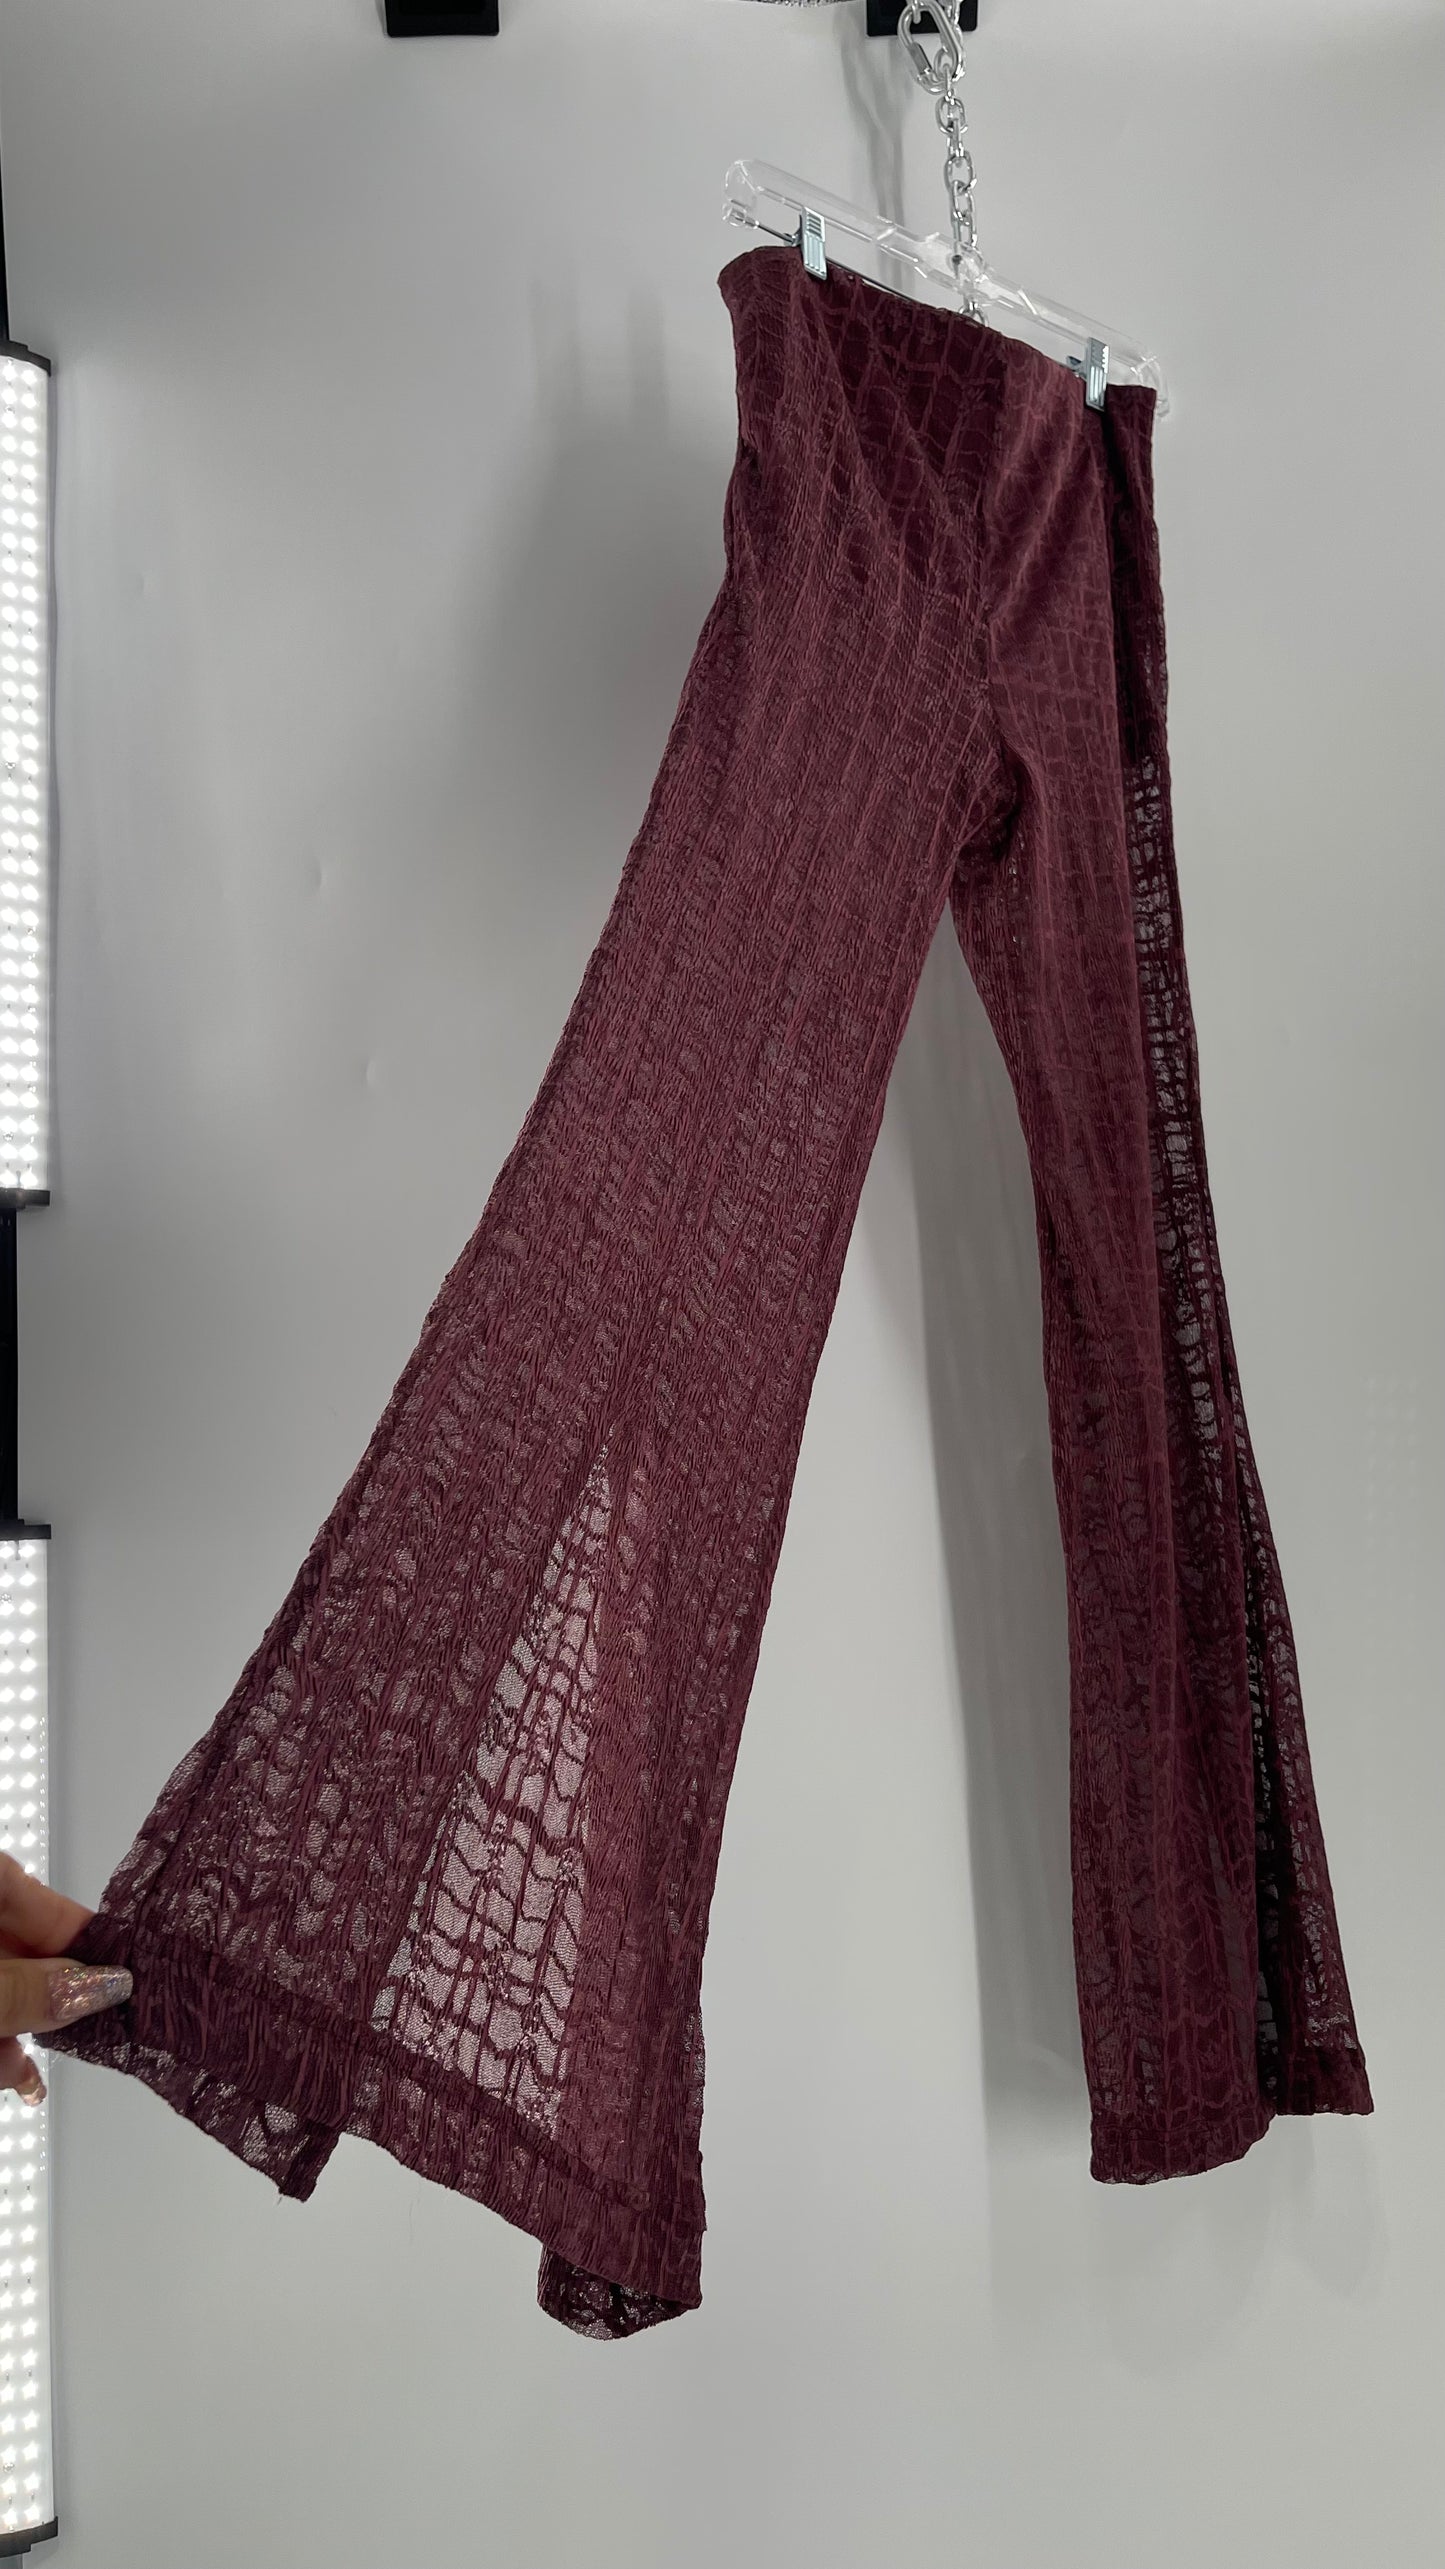 Free People Plum Lace Flares with Vented Hem and Sewn in Shorts Tags Attached (Medium)